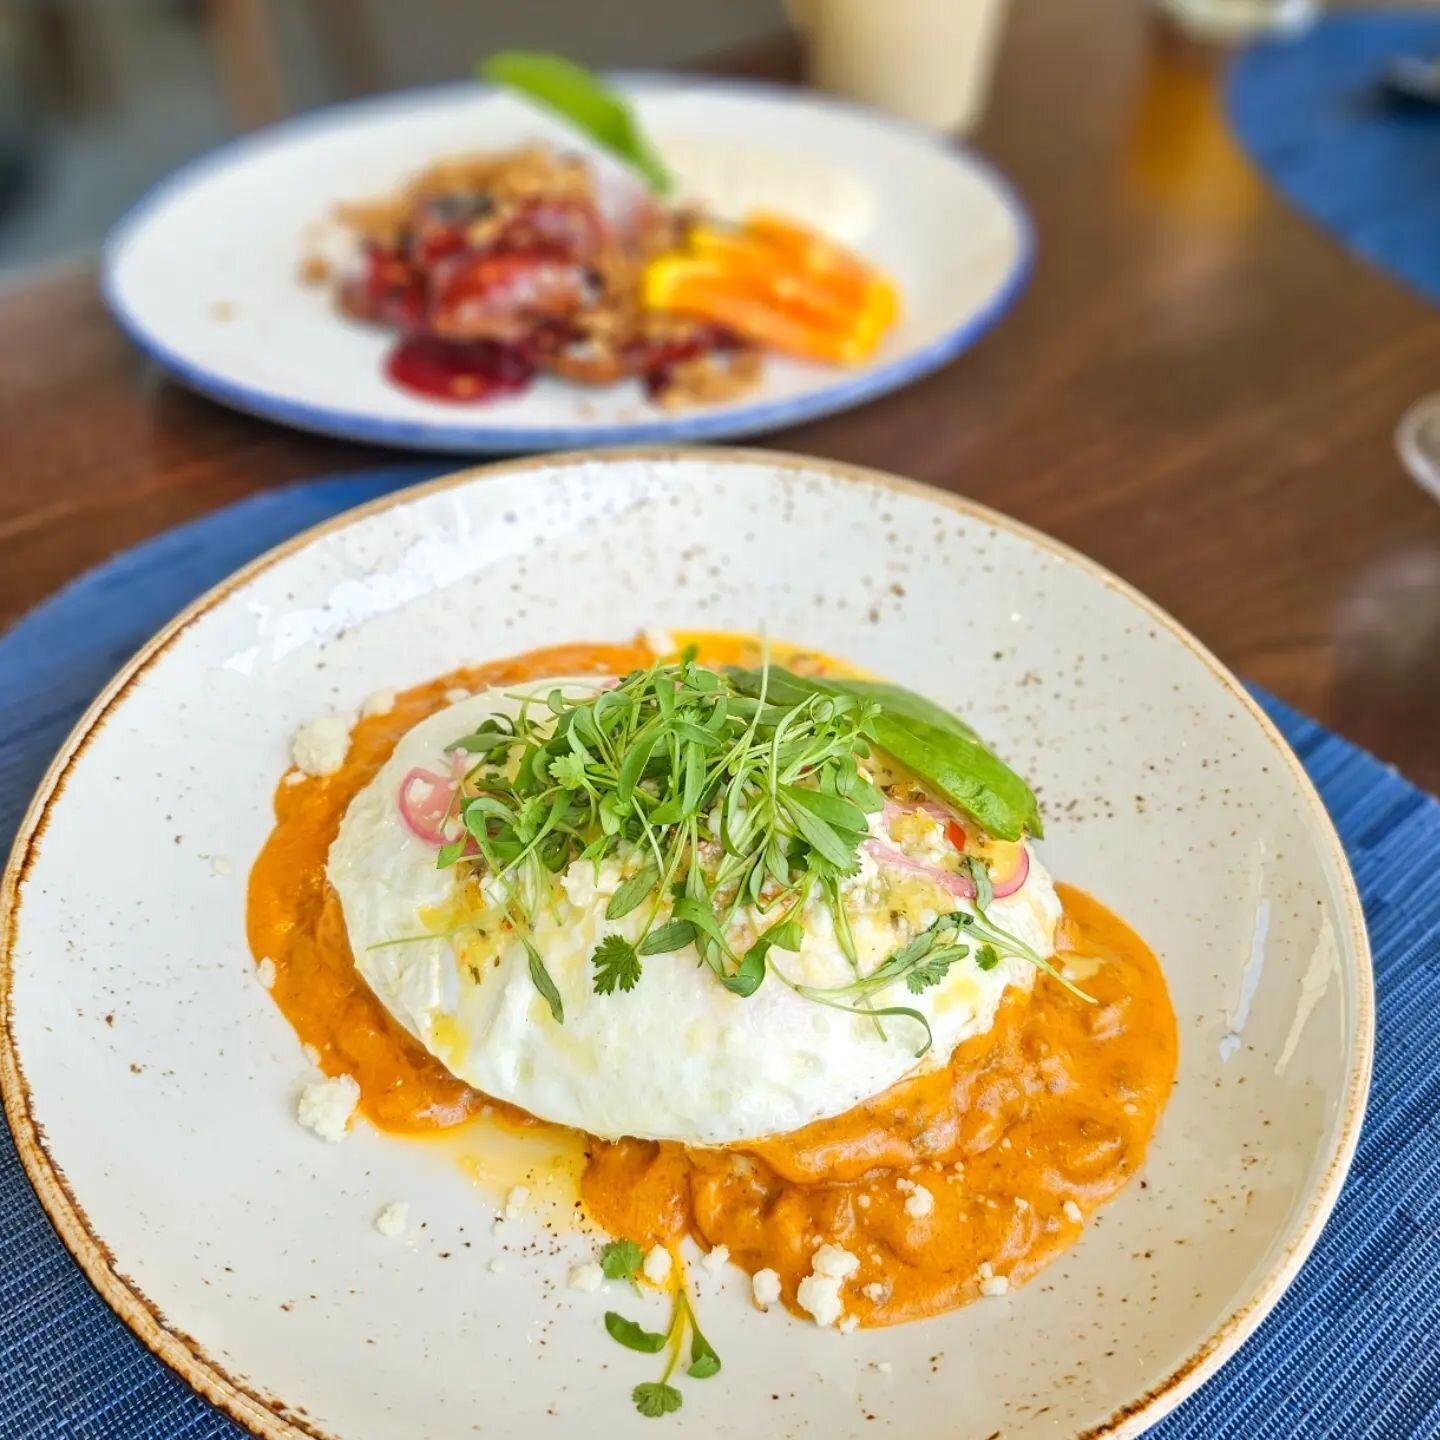 Brunch! This weekend's Chef Specials at @hearth61 at @mountainshadowsaz are both fantastic! Can't decide which of Chef @clos.rdz dishes I like the best: Biscuits &amp; Chorizo Gravy with @schreinersfinesausagephx chorizo, Two Wash Ranch eggs, and tom